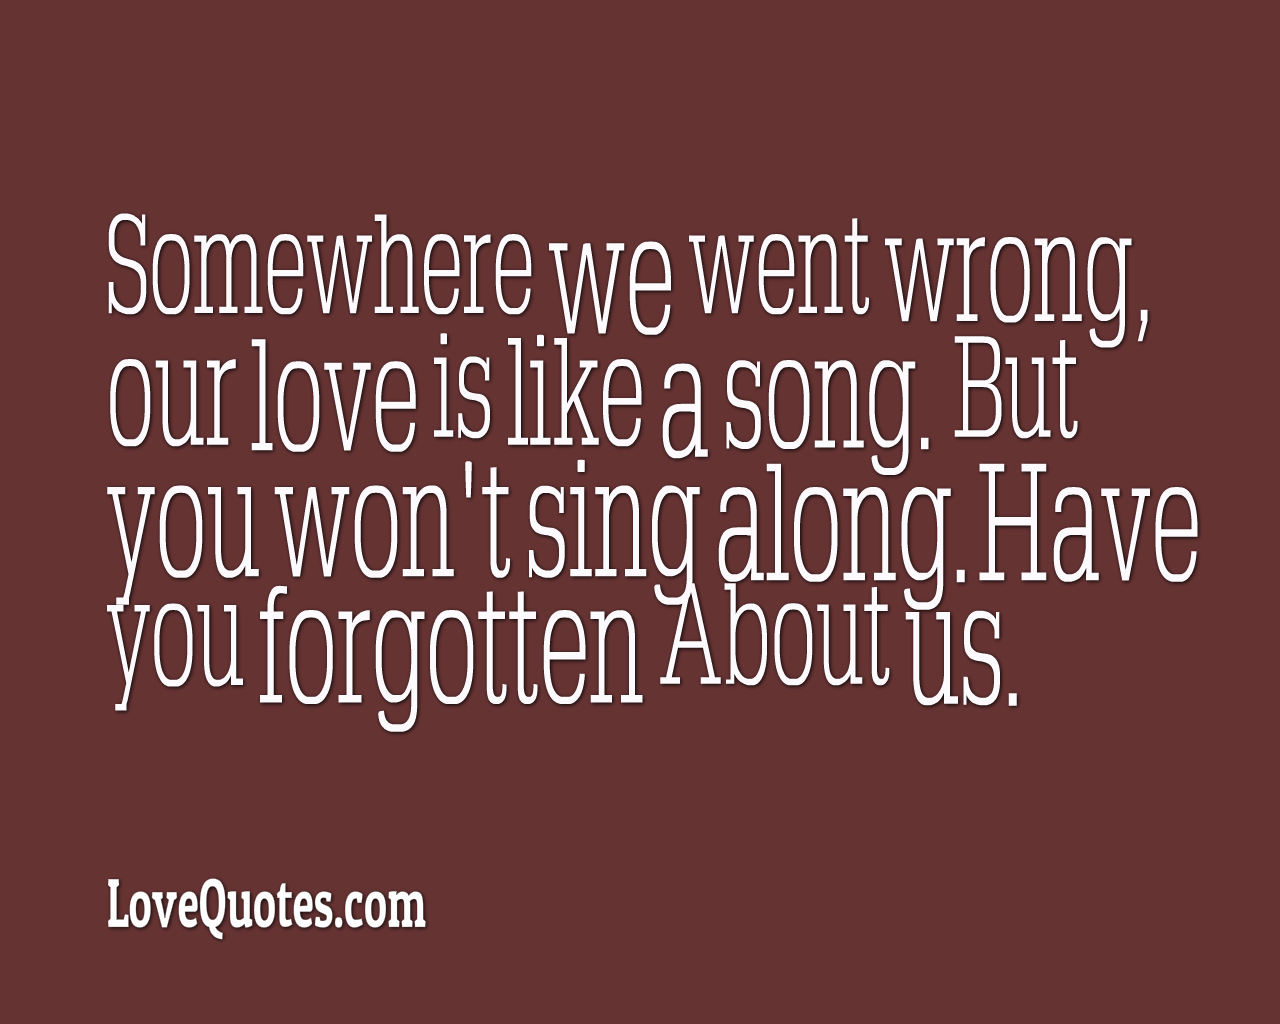 Our Love Is Like A Song